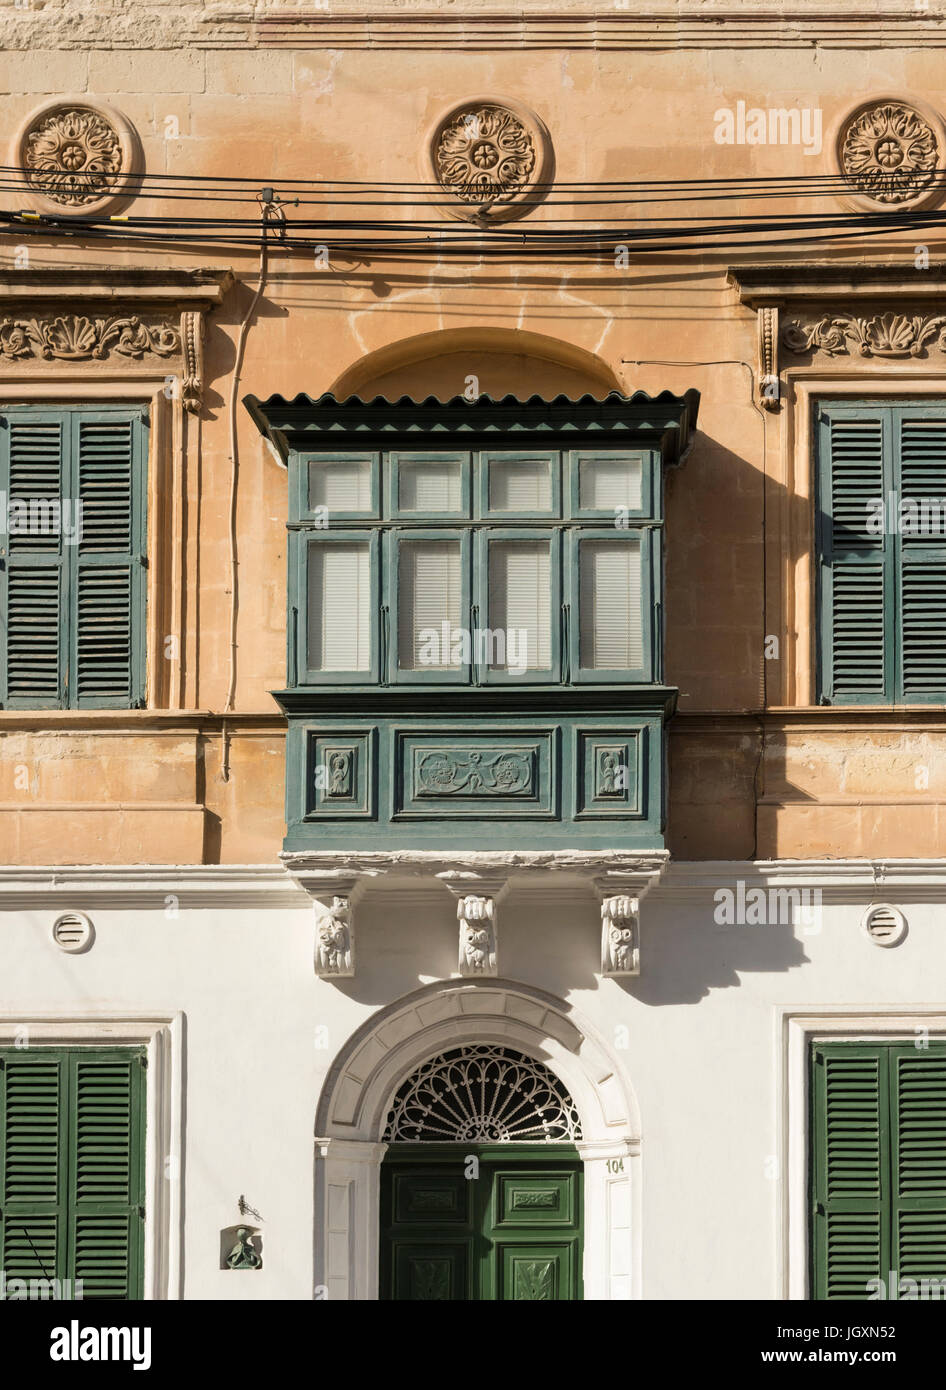 A traditional Maltese balcony in Valetta Malta a part of the traditional architecture Stock Photo